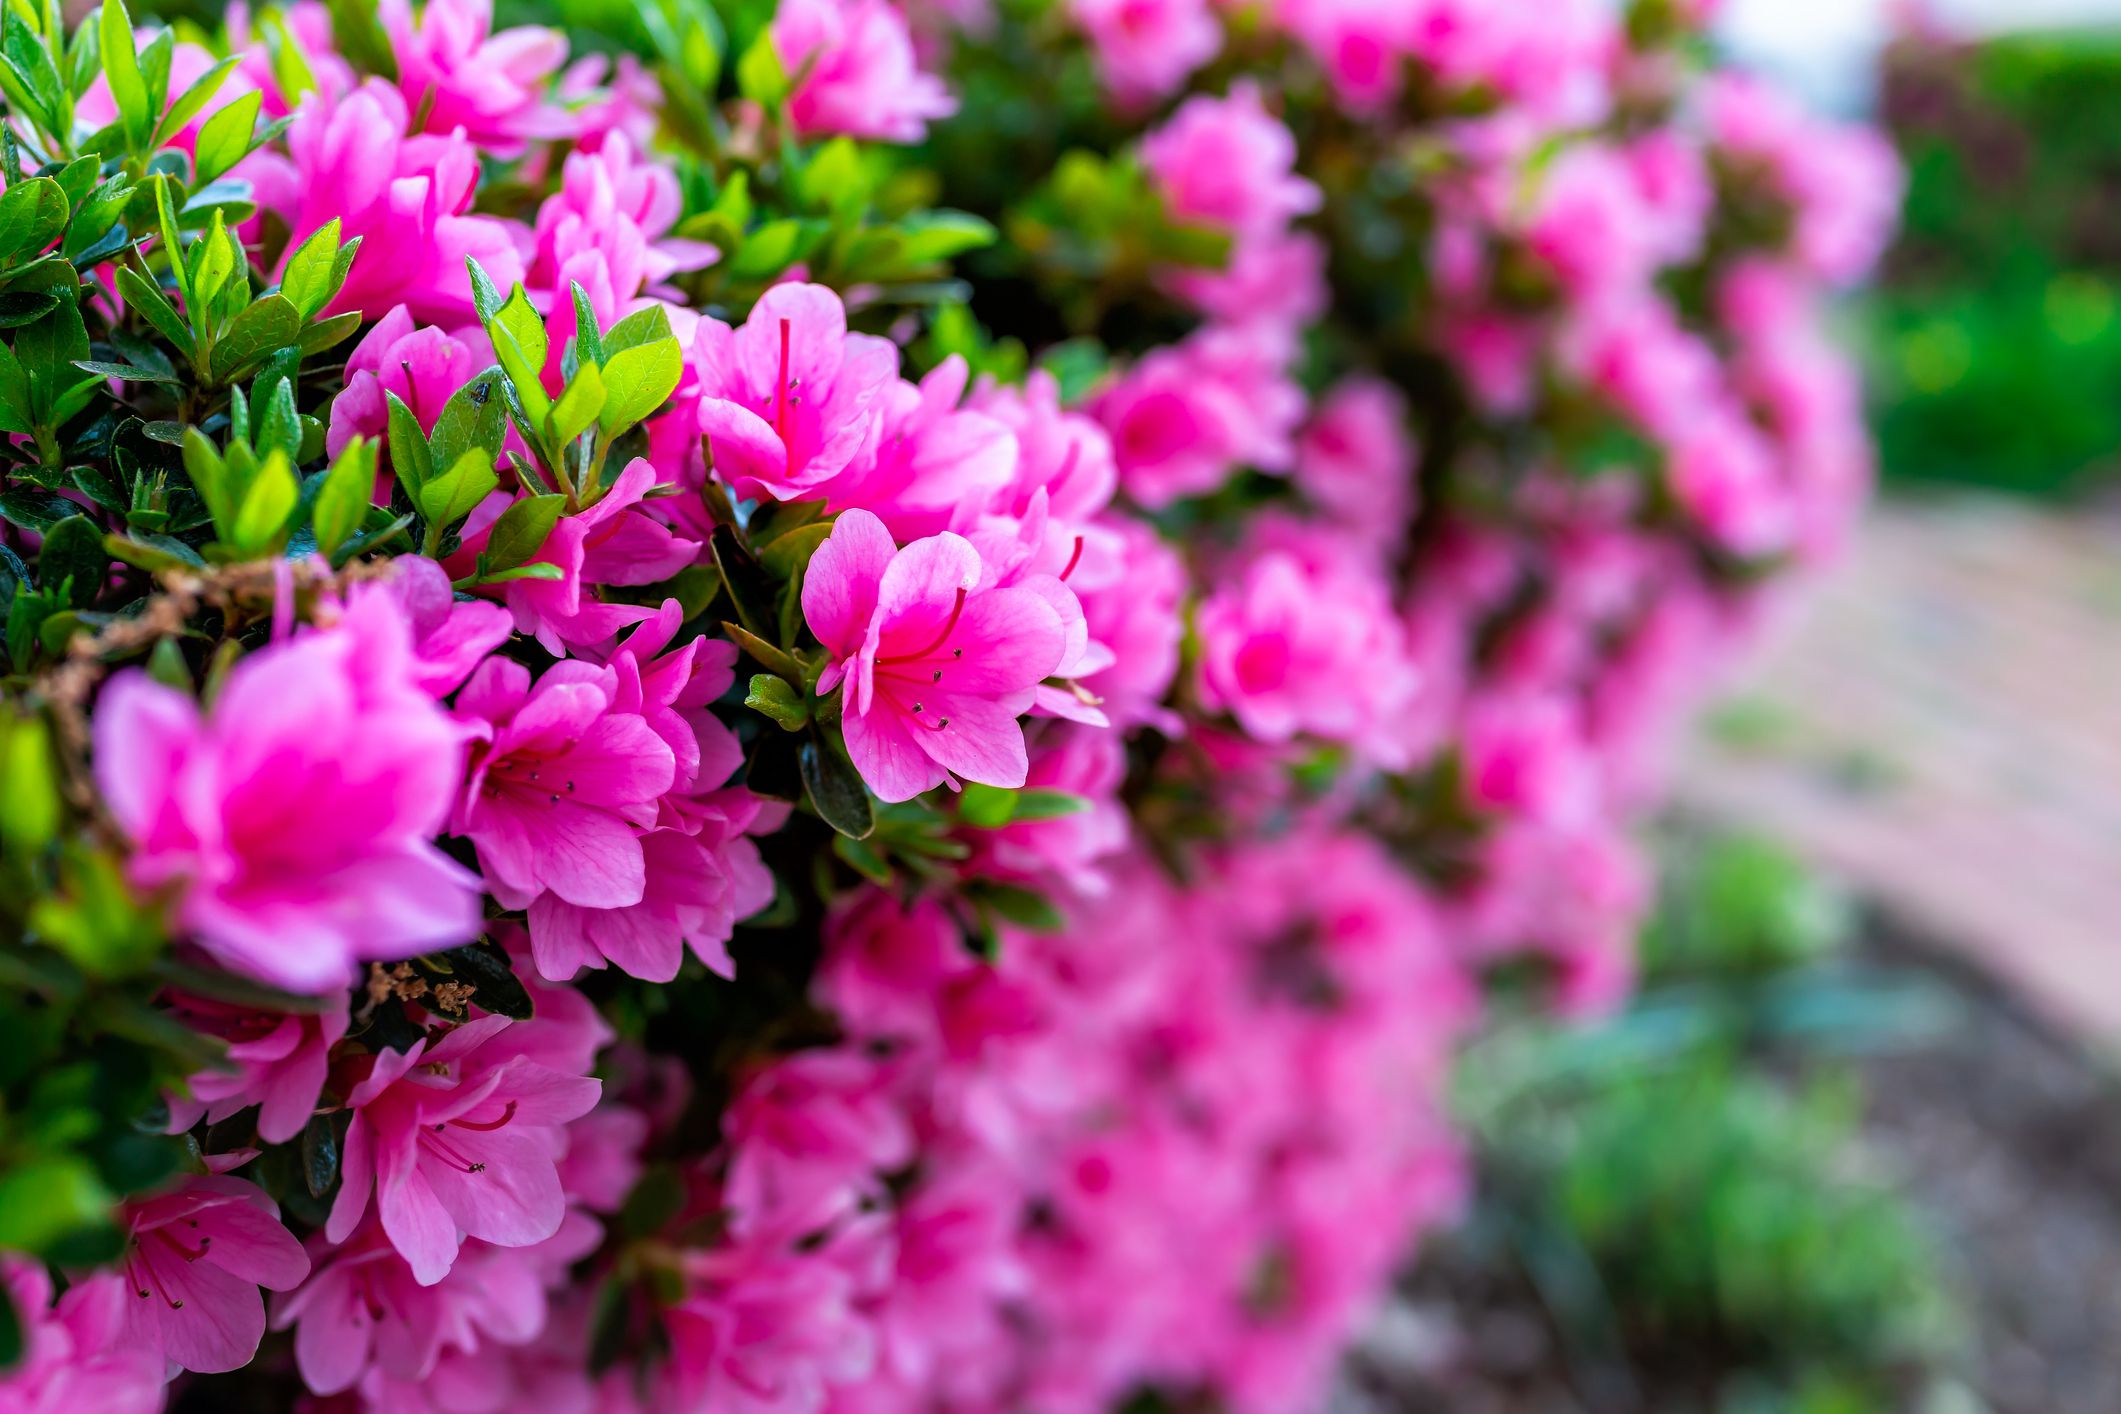 <p>Part of the rhododendrons floral family, azaleas are highly toxic to pets when ingested. Eating even a few leaves can result in vomiting, diarrhea, and excessive drooling; without immediate veterinary intervention, the pet could start seizing, fall into a coma, or even die. </p>